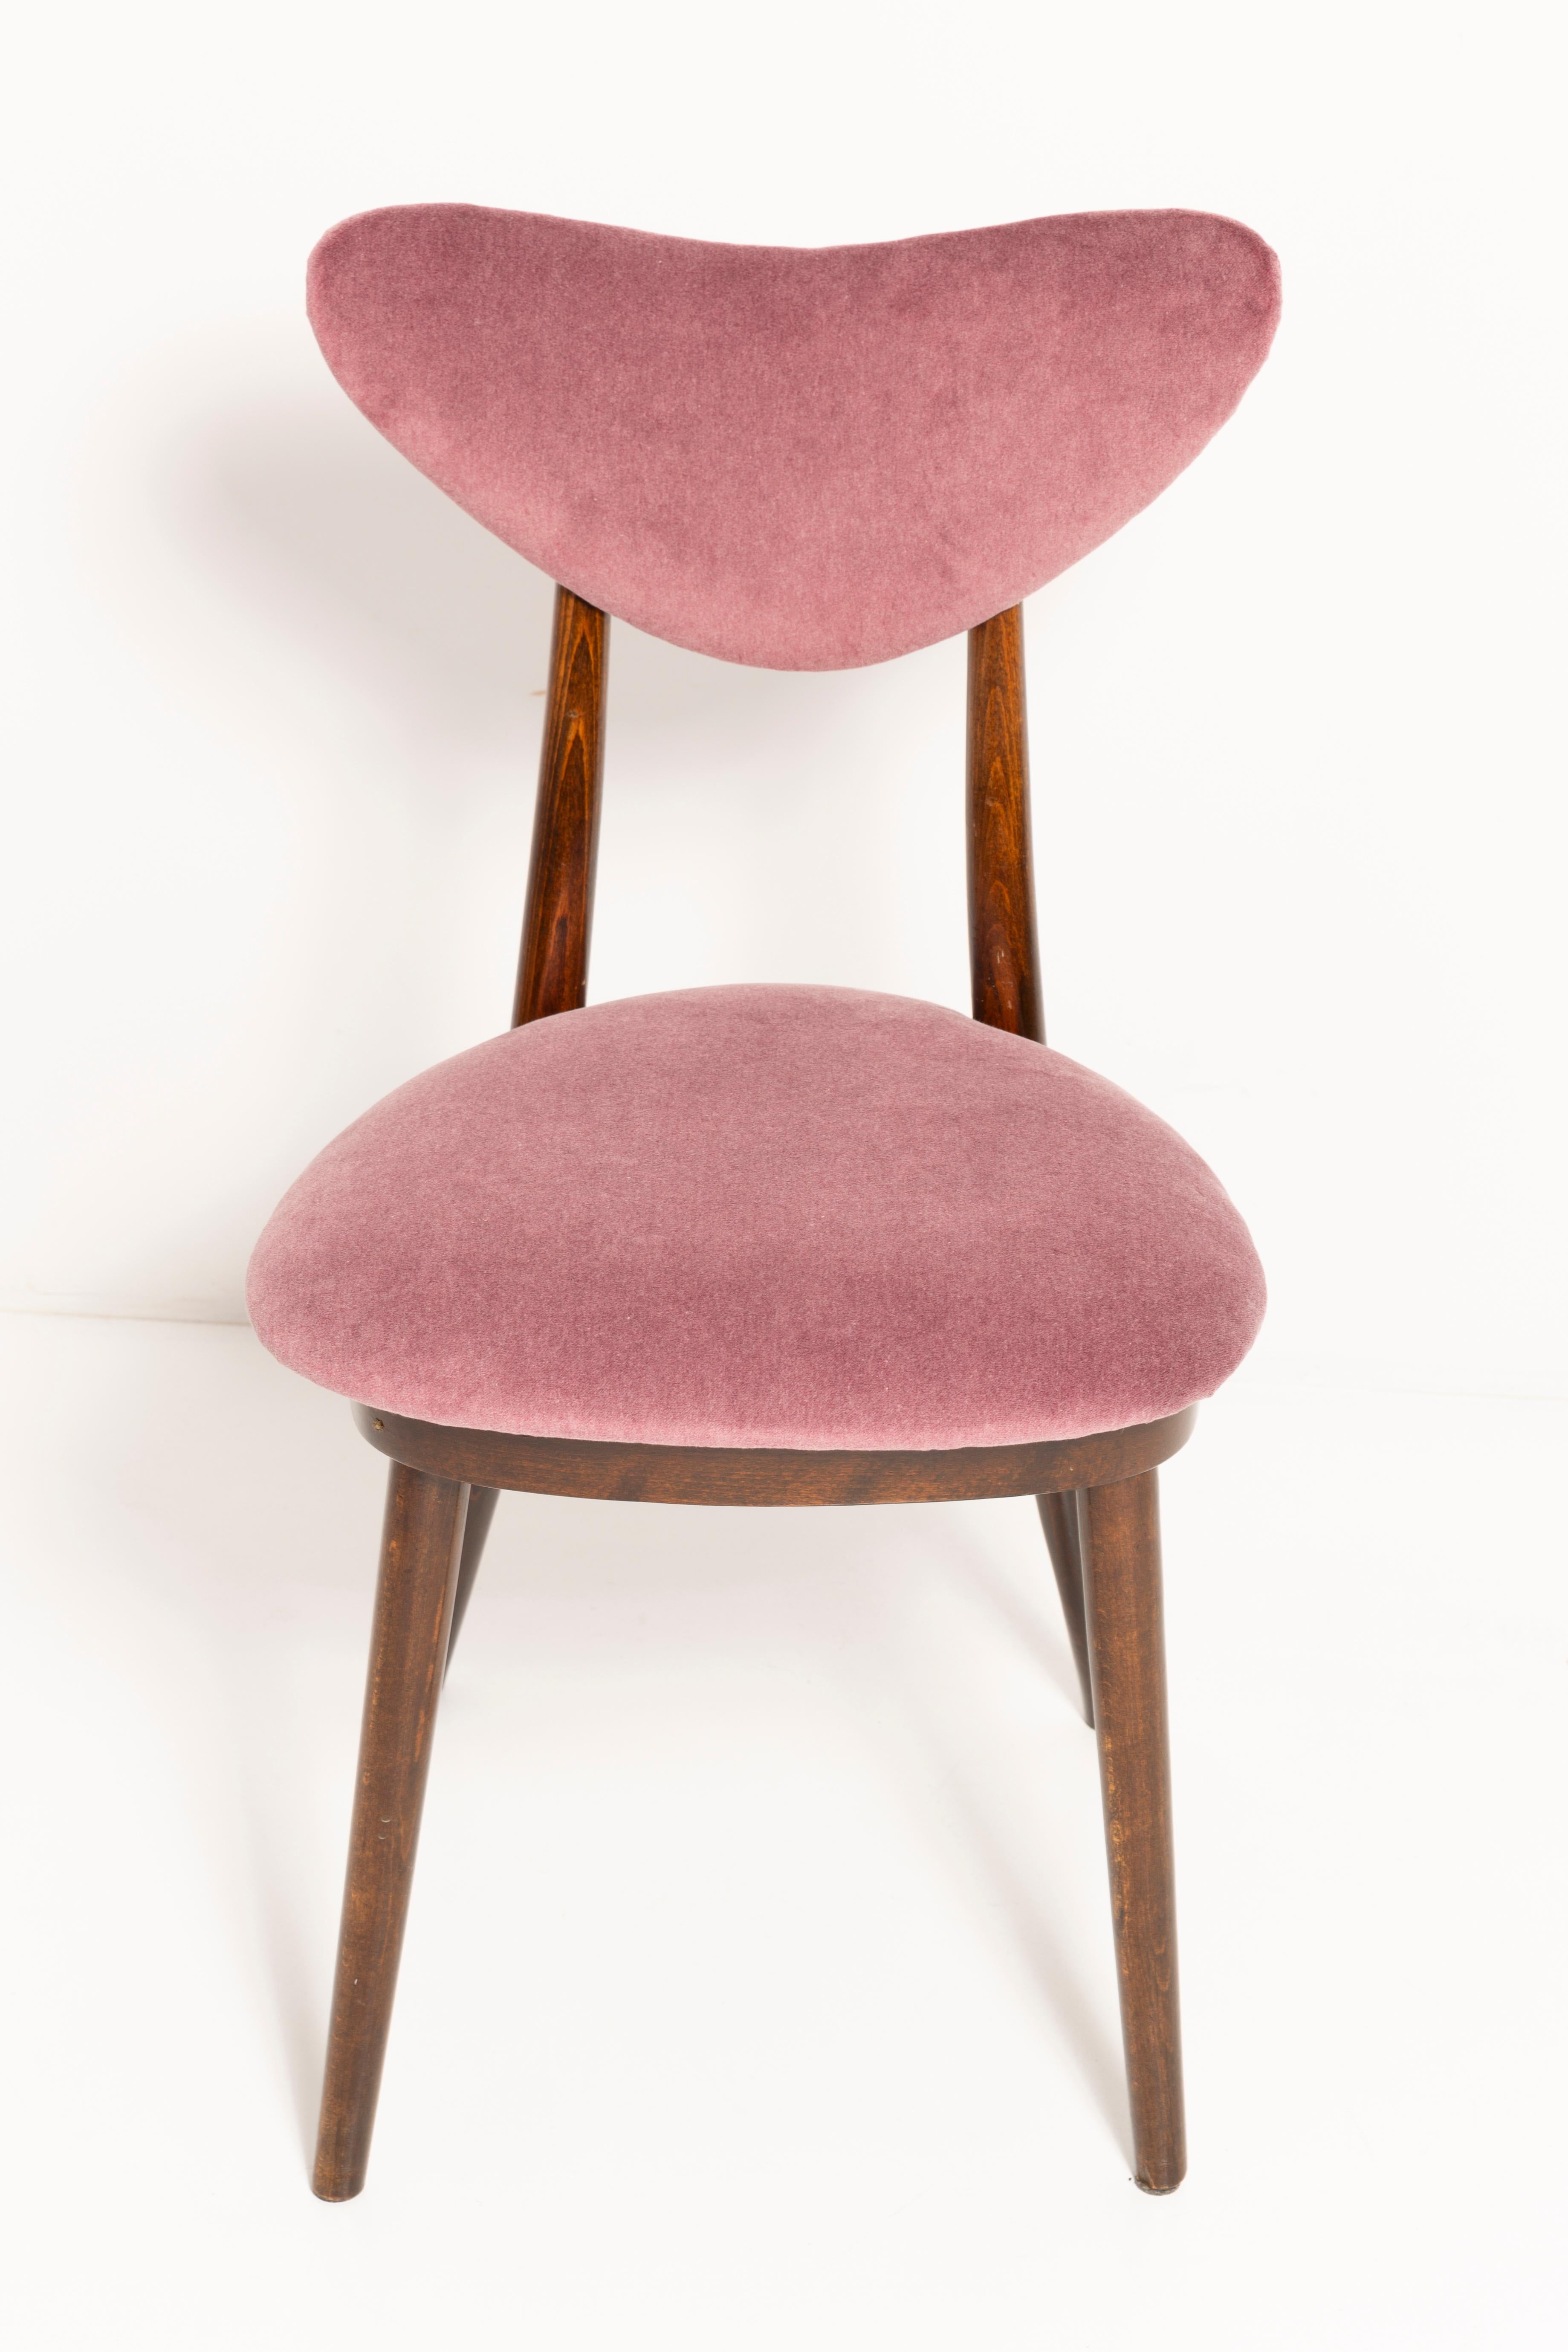 Hand-Crafted Set of Four Mid Century Burgundy Cotton-Velvet Heart Chairs, Europe, 1960s For Sale